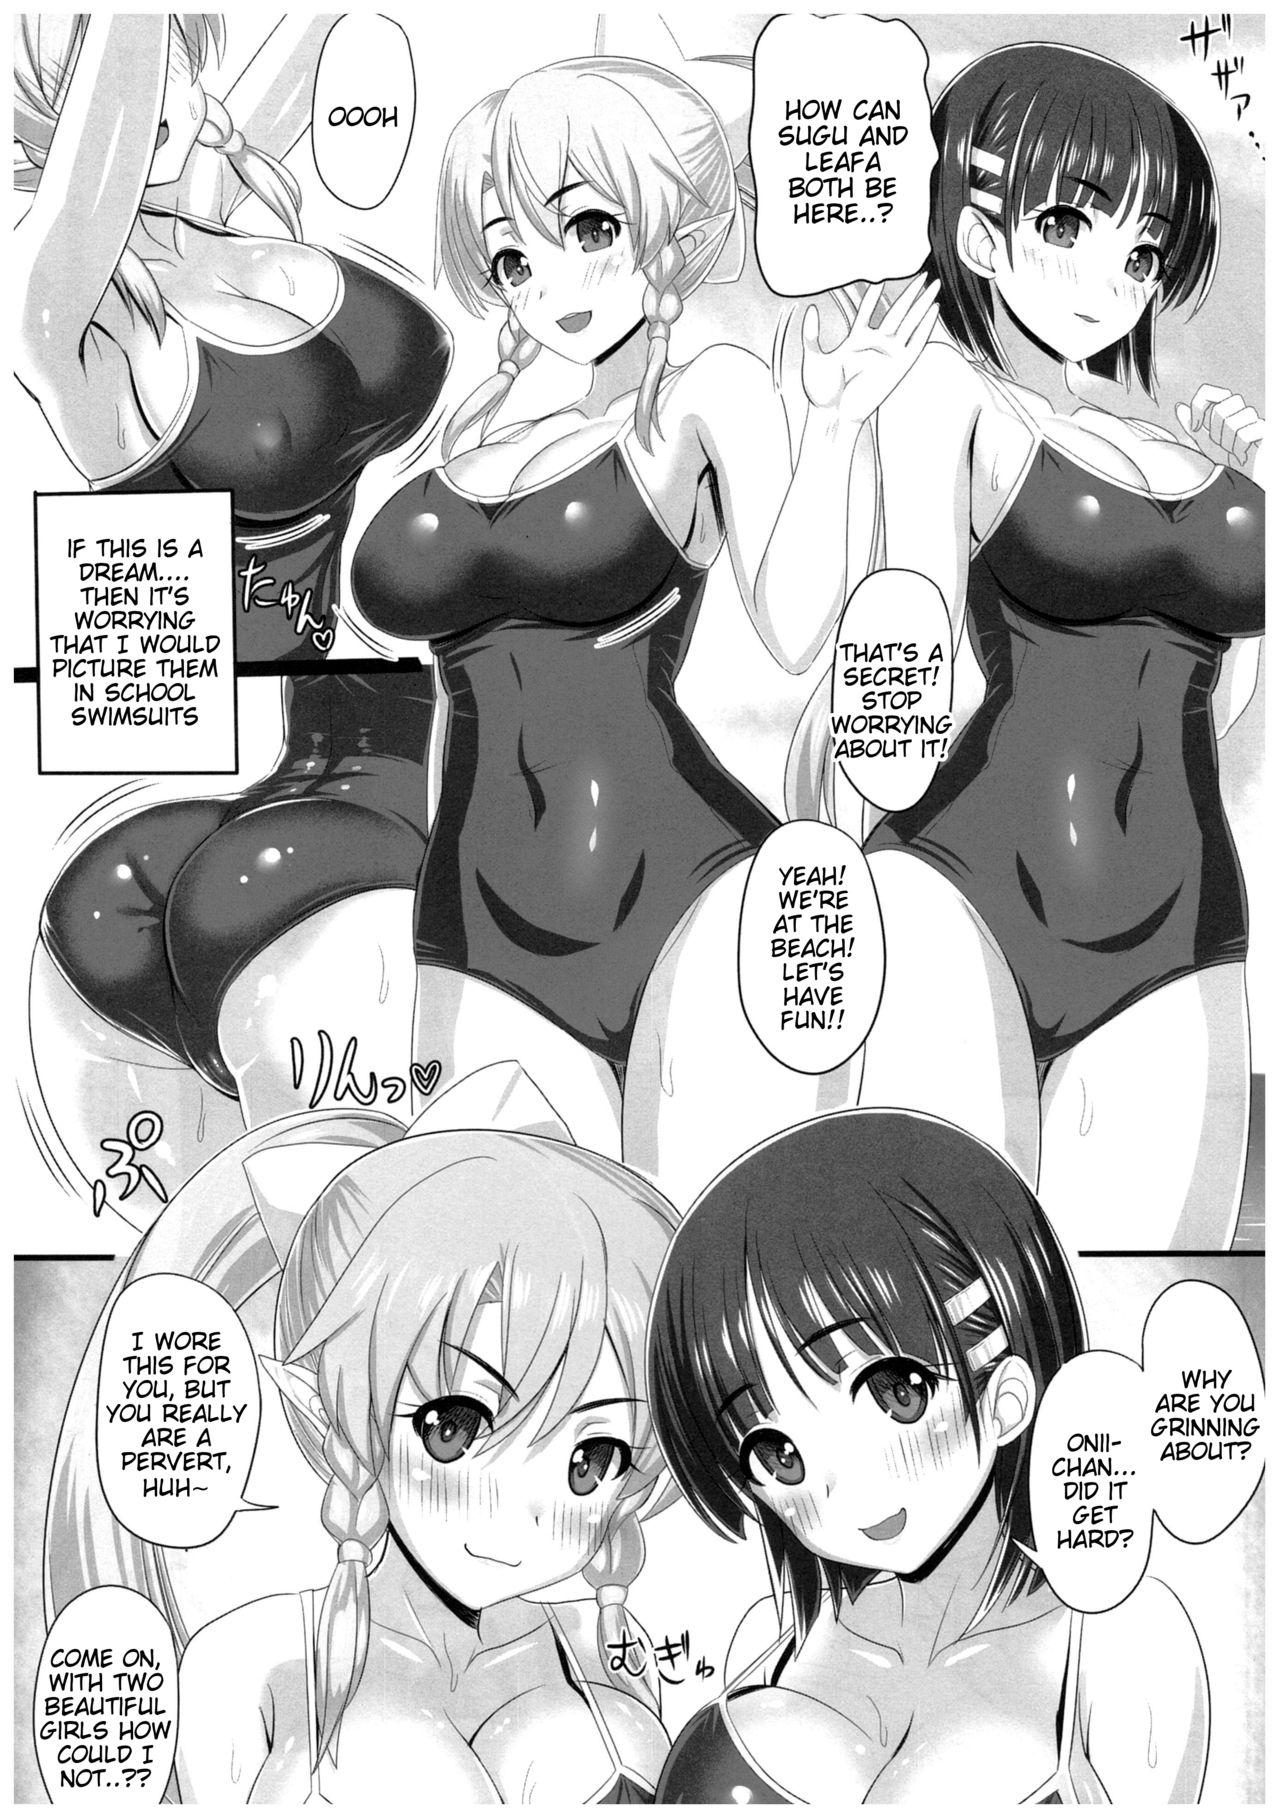 18yearsold SAOn&Off SUMMER! - Sword art online Tight - Page 5